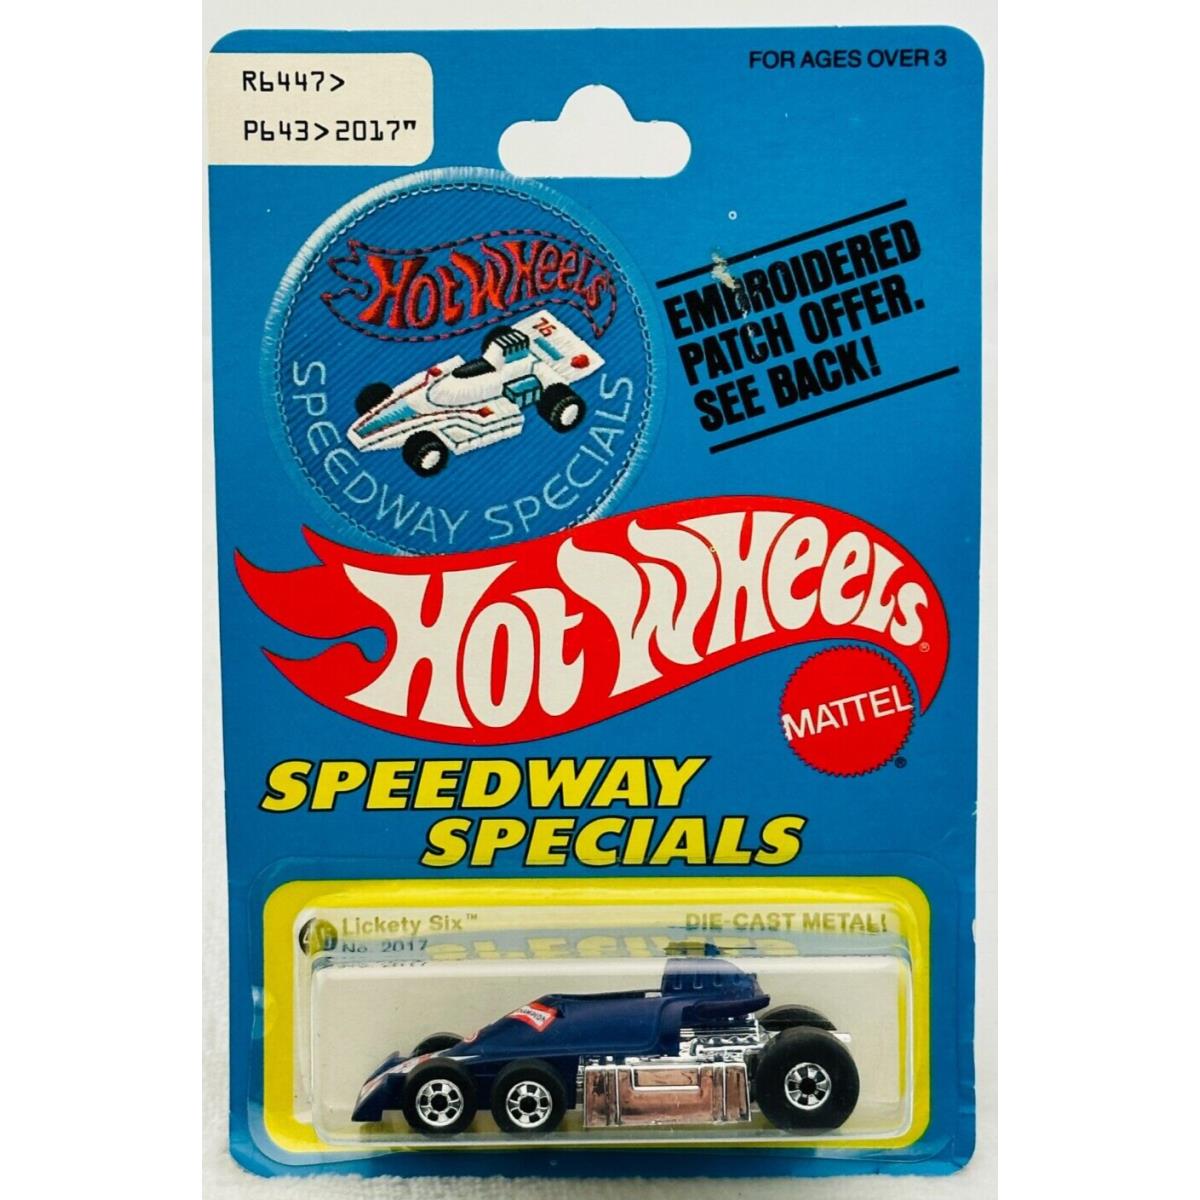 Hot Wheels Blackwall Lickety Six Speedway Specials 2506 Patch Card in Blister